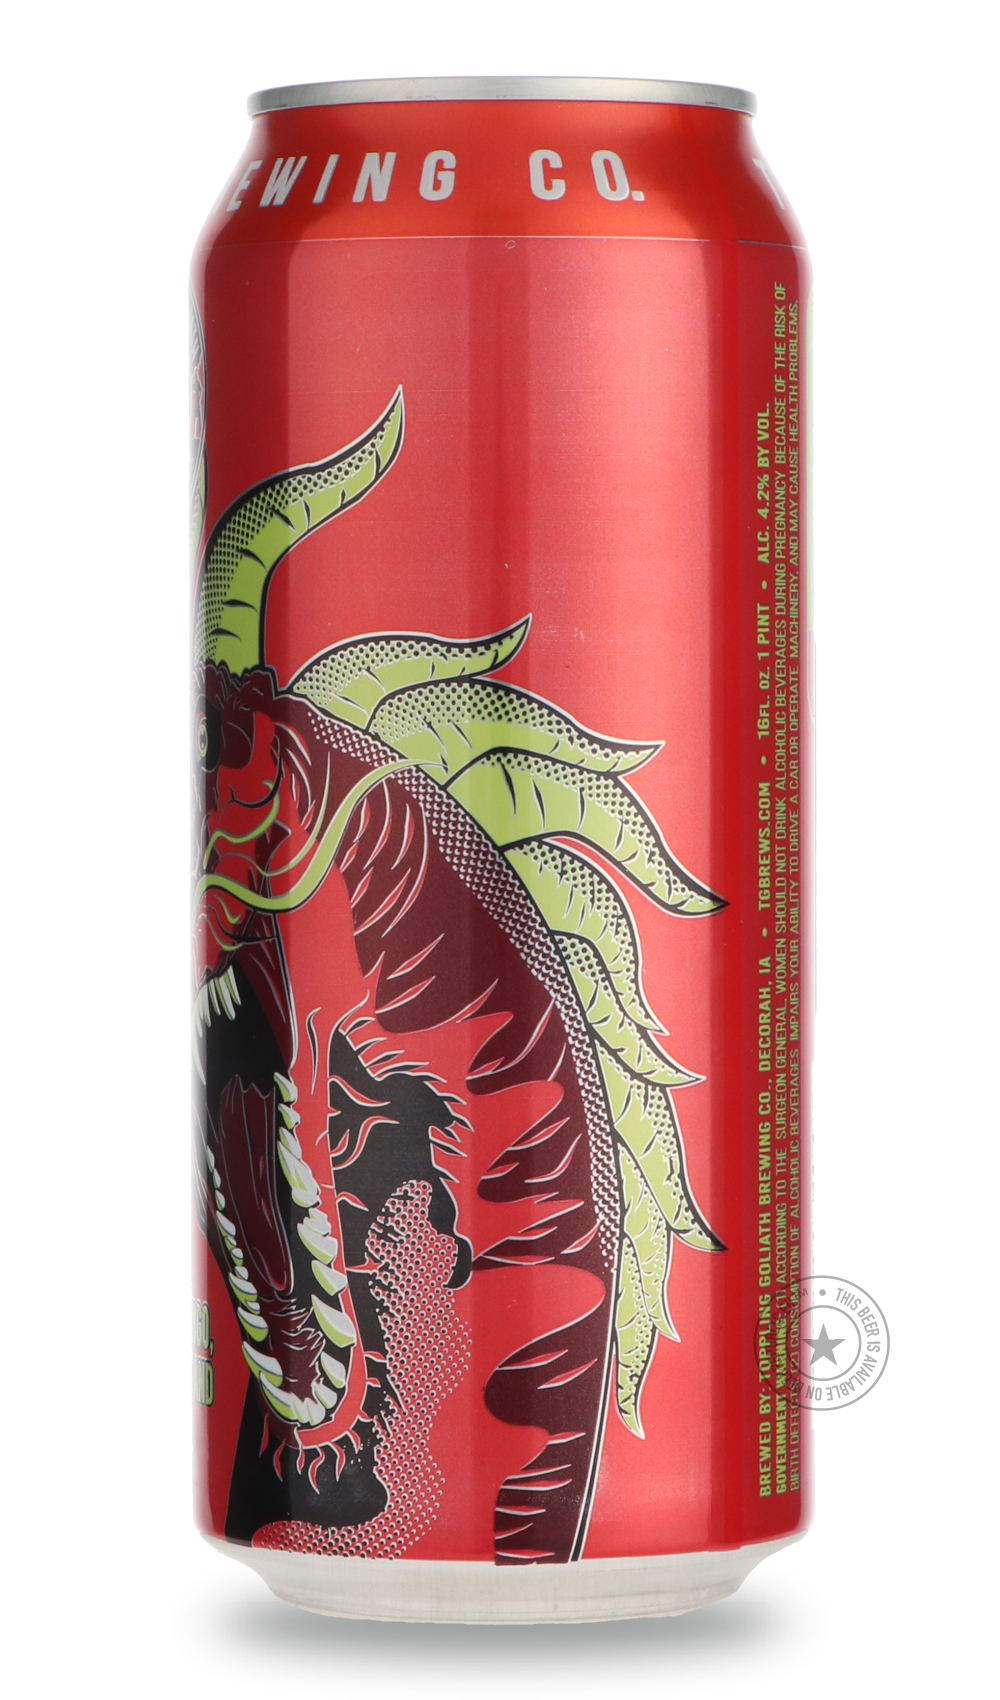 -Toppling Goliath- Dragon Fandango-Sour / Wild & Fruity- Only @ Beer Republic - The best online beer store for American & Canadian craft beer - Buy beer online from the USA and Canada - Bier online kopen - Amerikaans bier kopen - Craft beer store - Craft beer kopen - Amerikanisch bier kaufen - Bier online kaufen - Acheter biere online - IPA - Stout - Porter - New England IPA - Hazy IPA - Imperial Stout - Barrel Aged - Barrel Aged Imperial Stout - Brown - Dark beer - Blond - Blonde - Pilsner - Lager - Wheat 